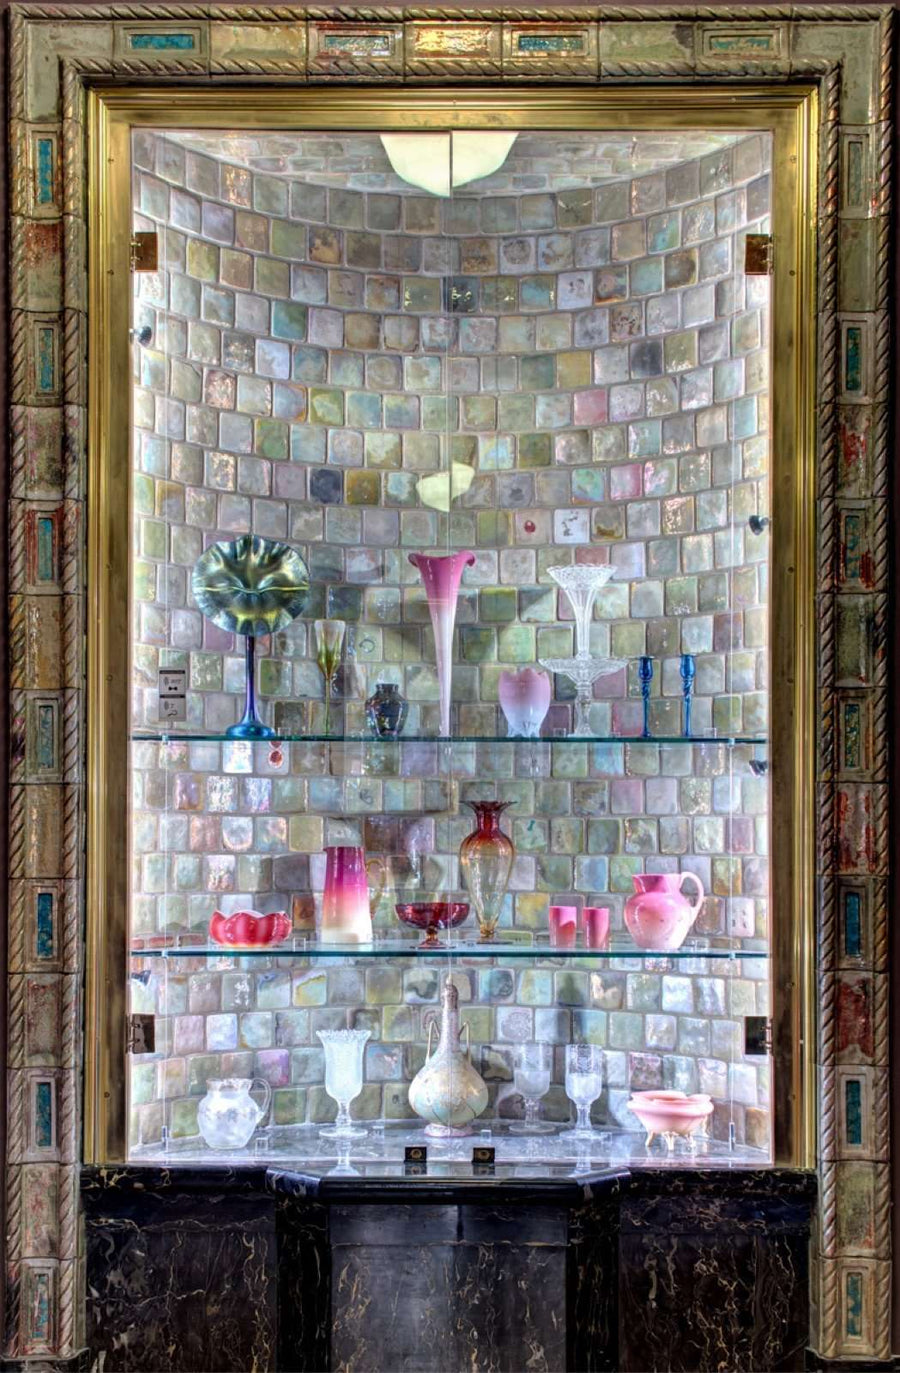 Around the alcove, colorful iridescent tiles border the outside.